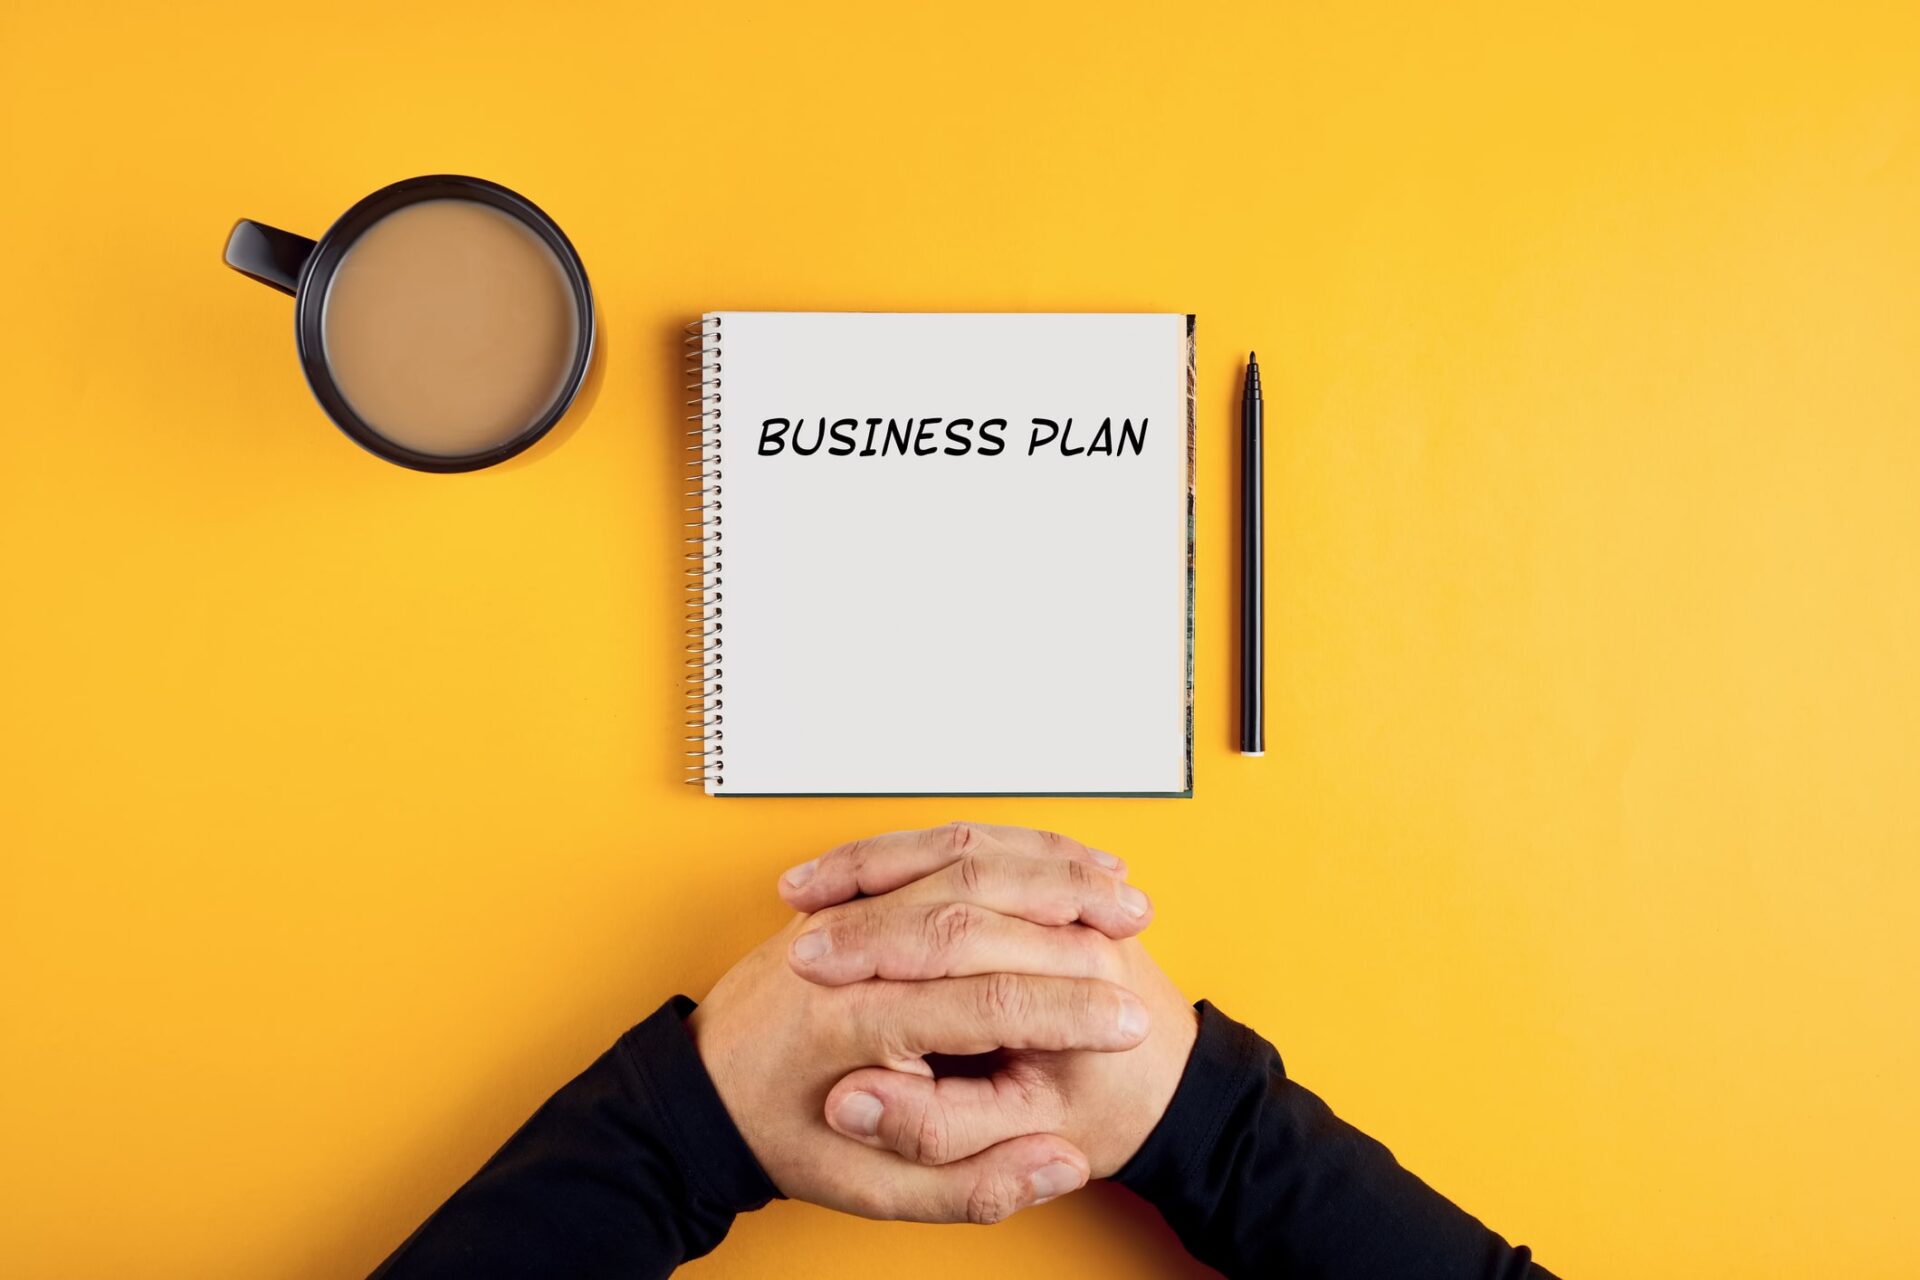 How to Create a Winning Business Plan - Step by Step Guide